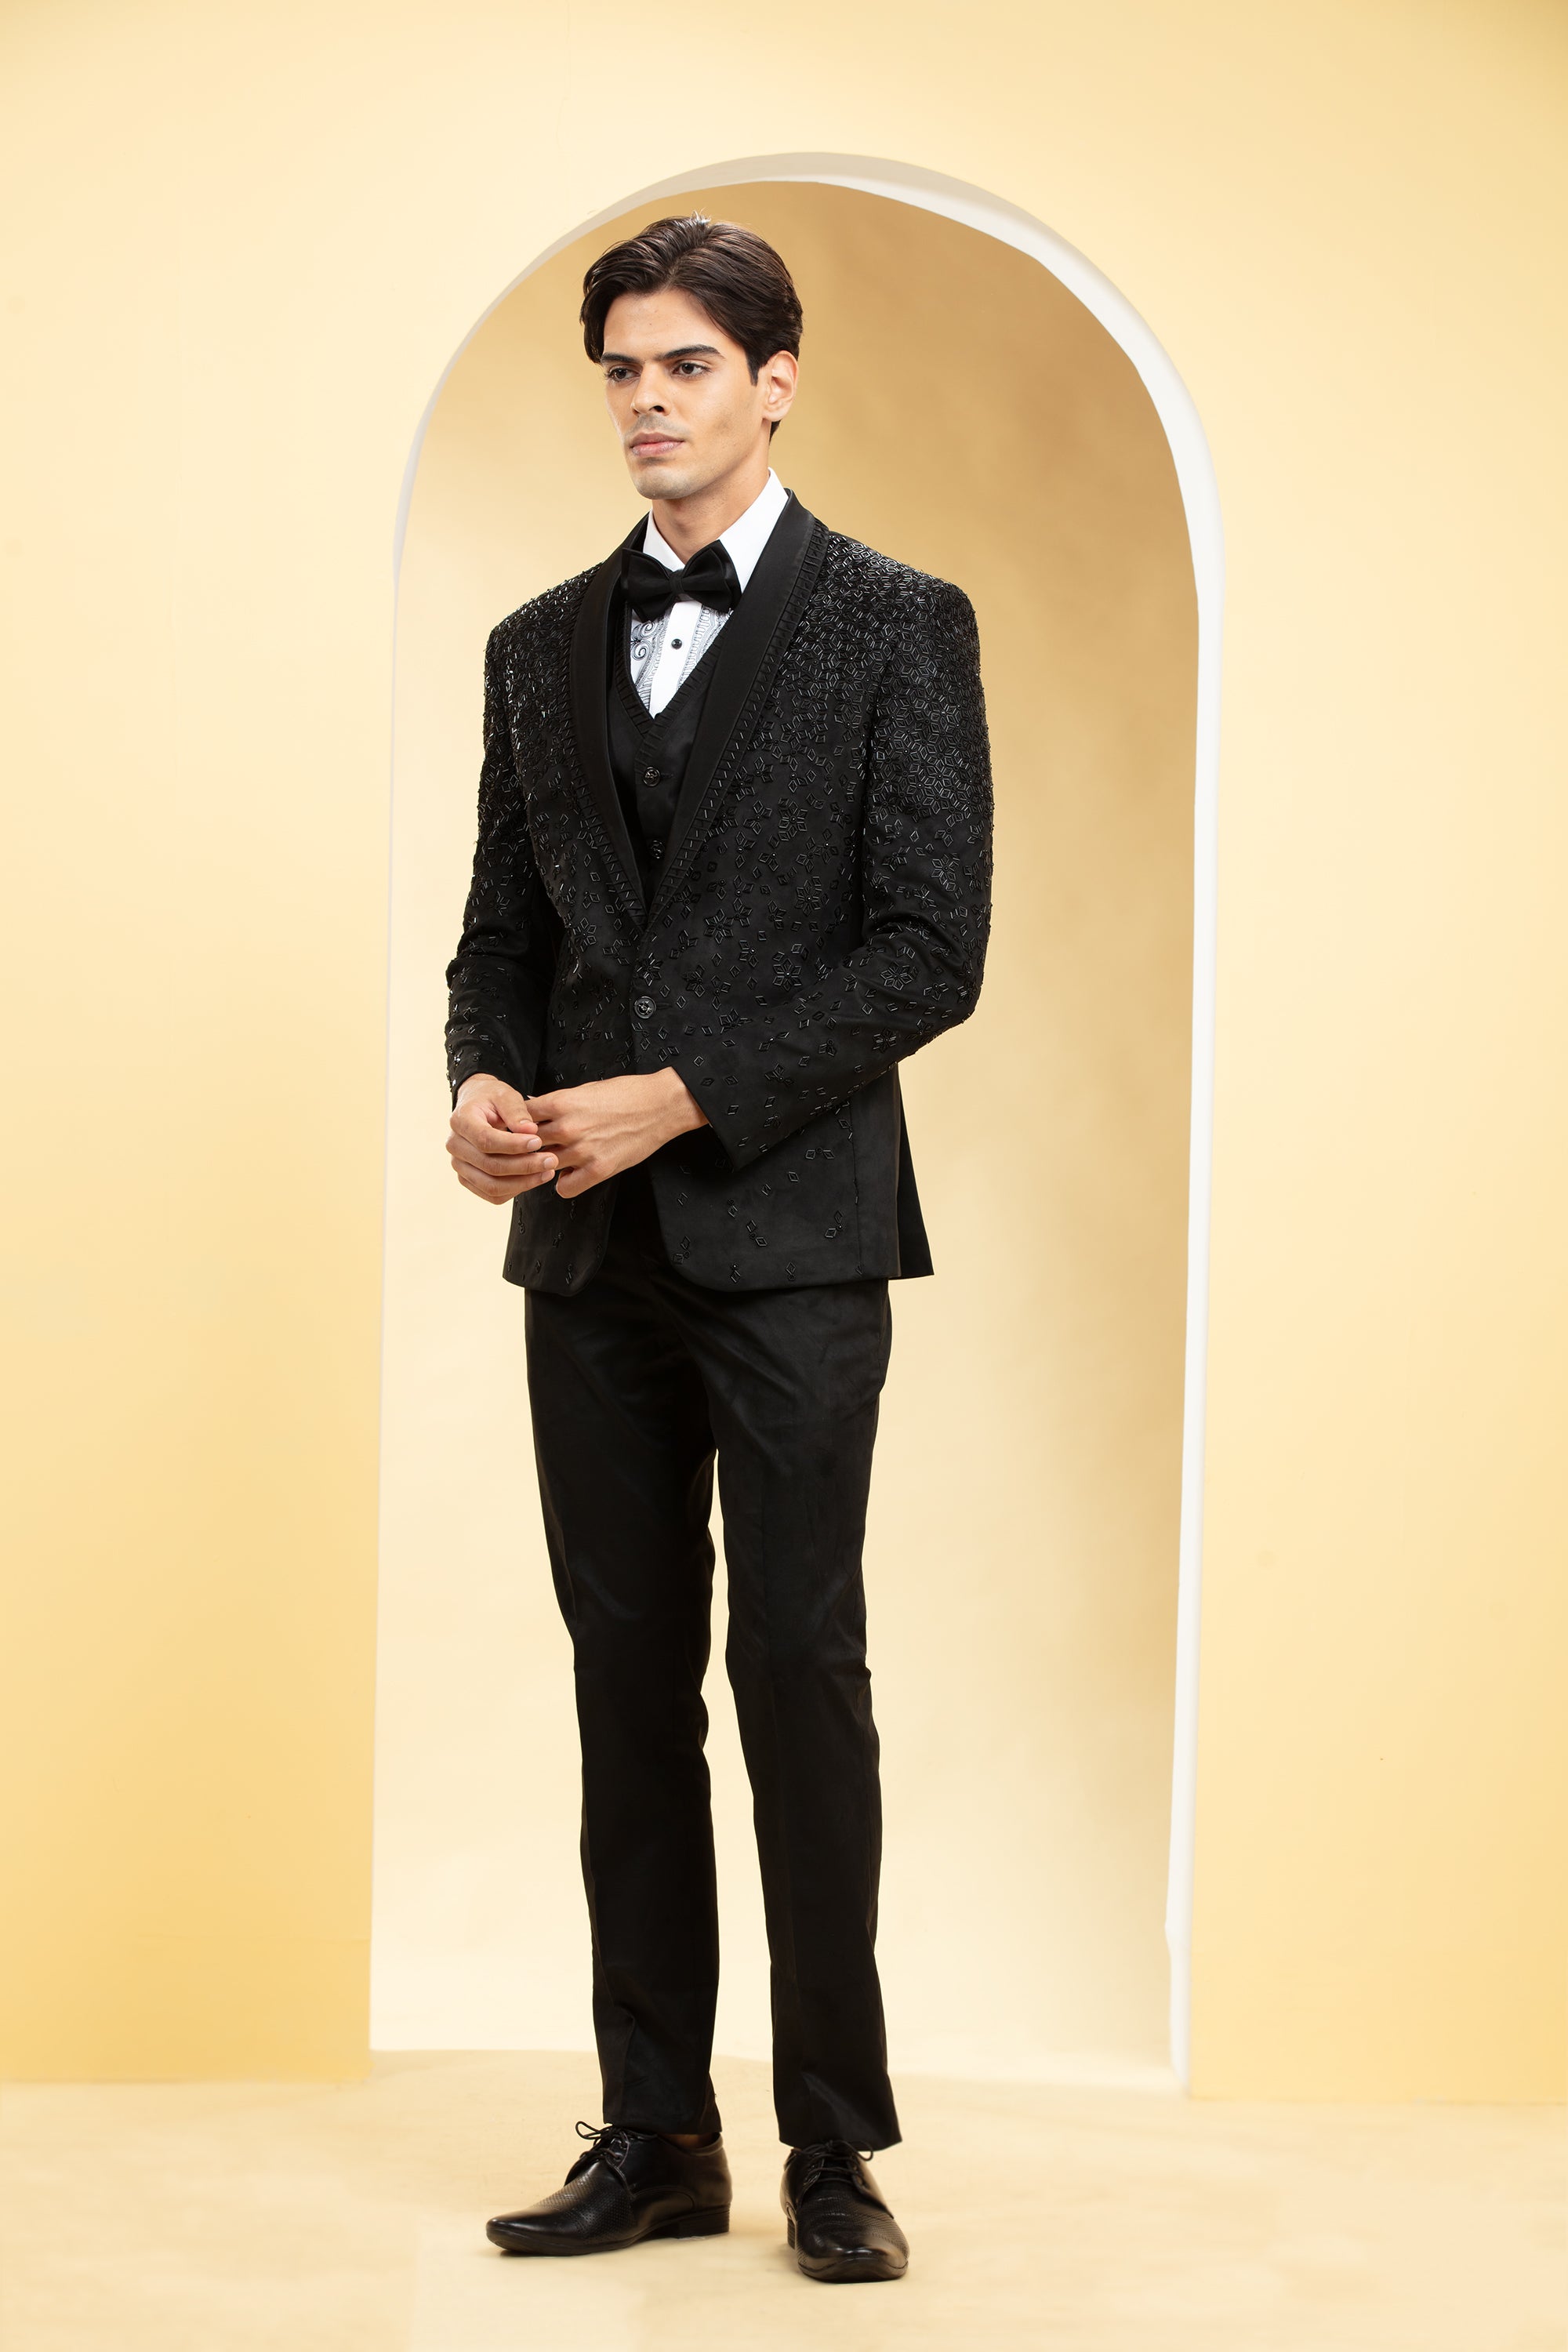 Coal Black Suede Tuxedo Set and Bow tie with Self cutdana work